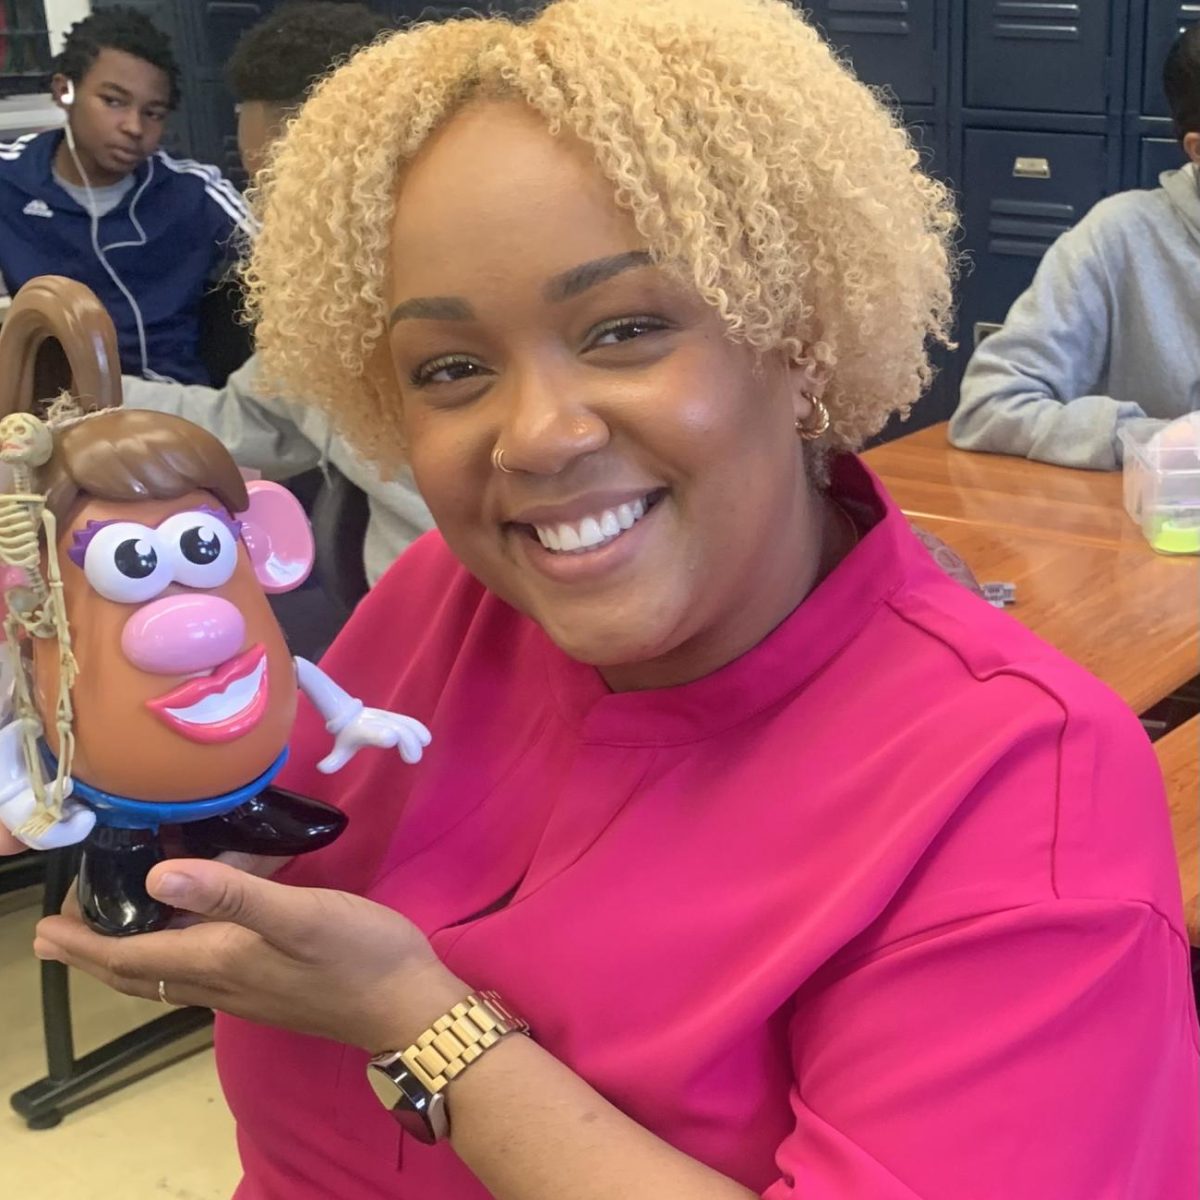 Ms. Dossous with her Potato head